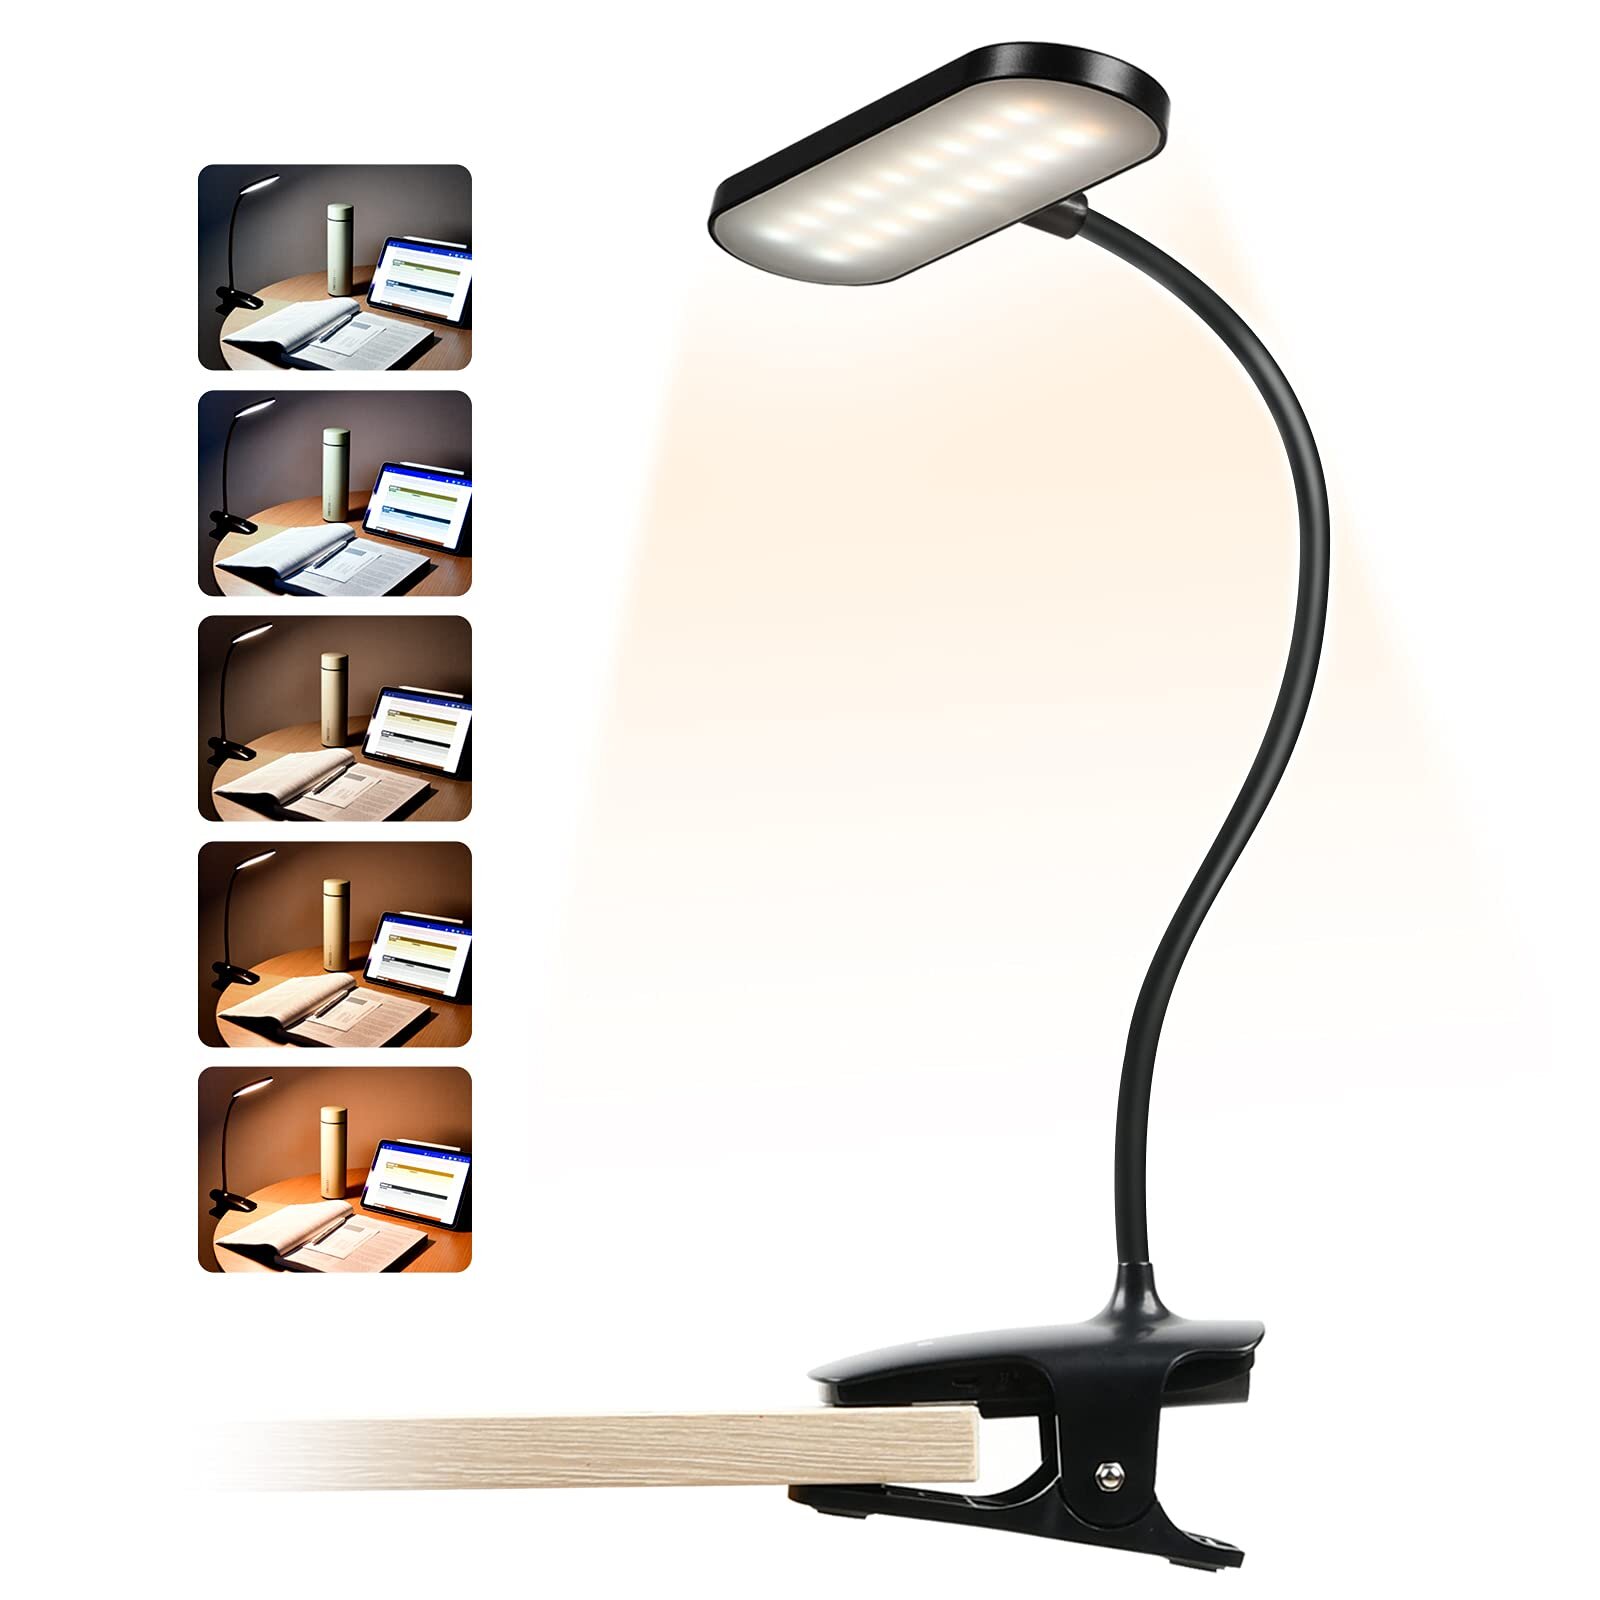 Black Happy-top® 360 Degree Rotating Flexible USB/Battery Power 28 LED Clip Light Table Desk Night Lamp Reading Light with USB Cable